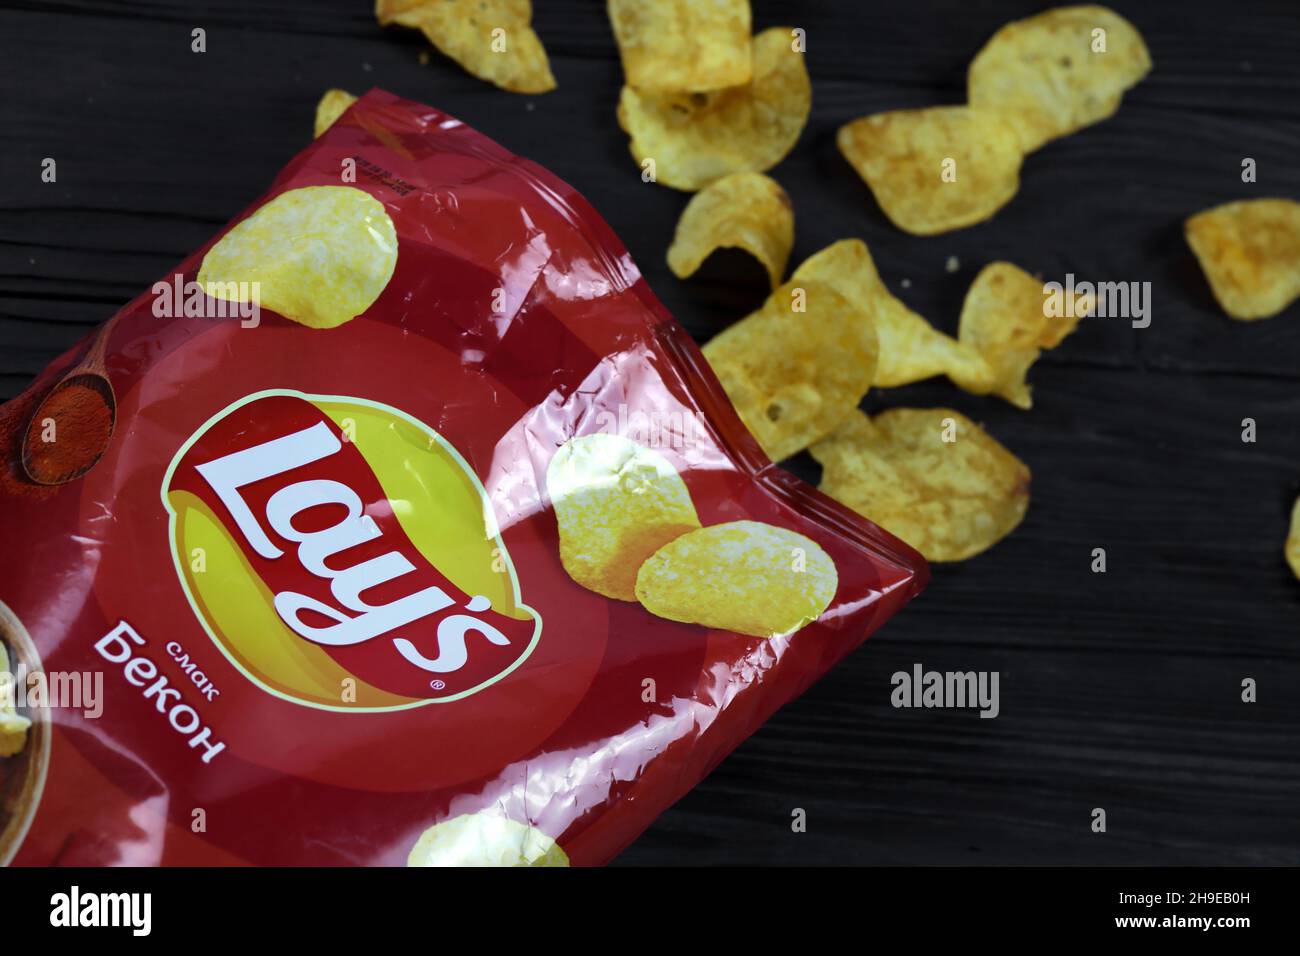 KHARKOV, UKRAINE - JANUARY 3, 2021: Lays potato chips with bacon flavour and original lays logo in middle of package. Worldwide famous brand of potato Stock Photo